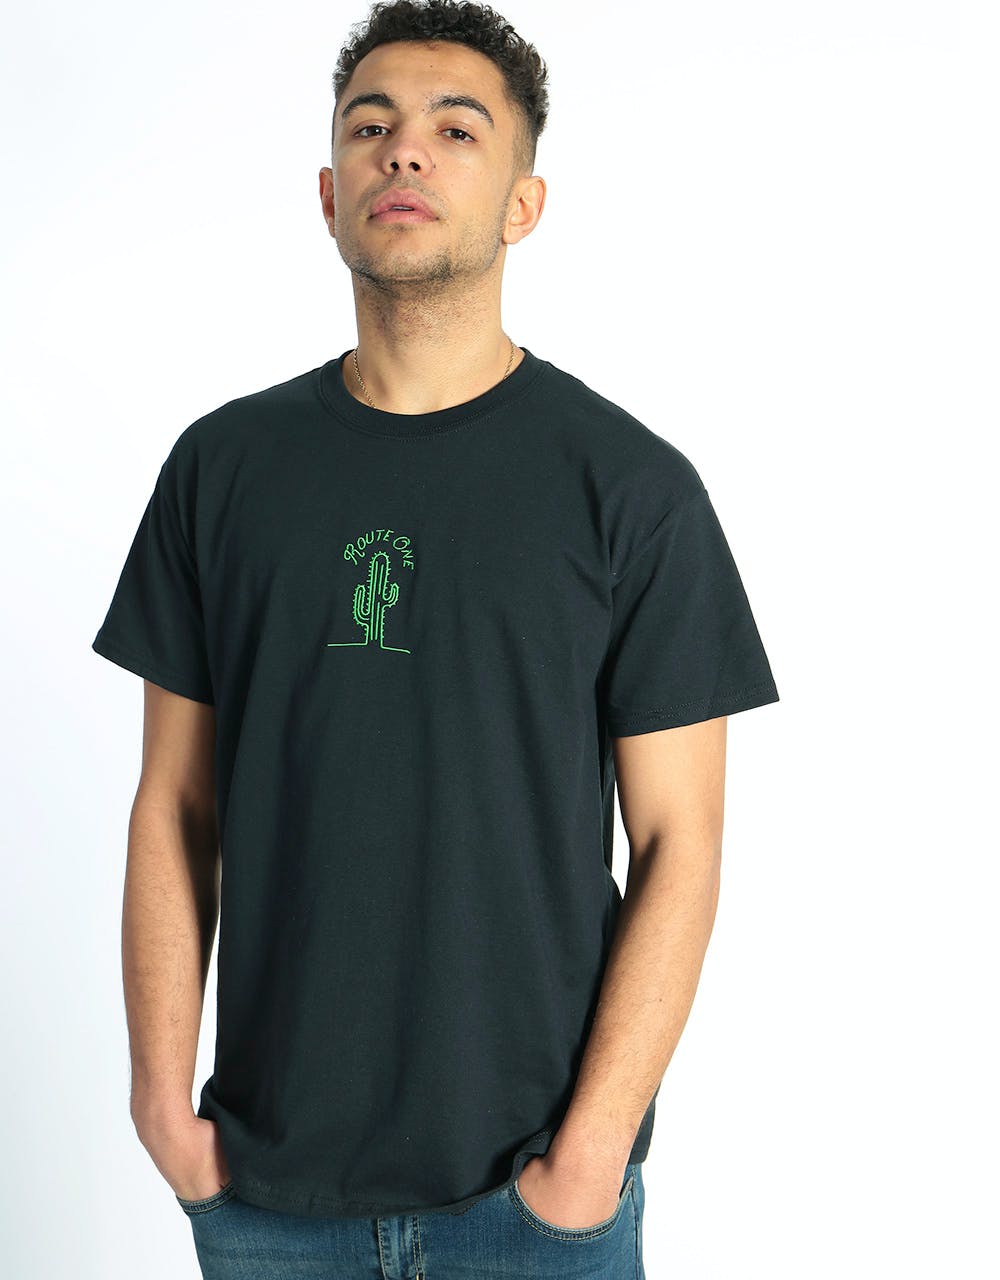 Route One Prickly T-Shirt - Black